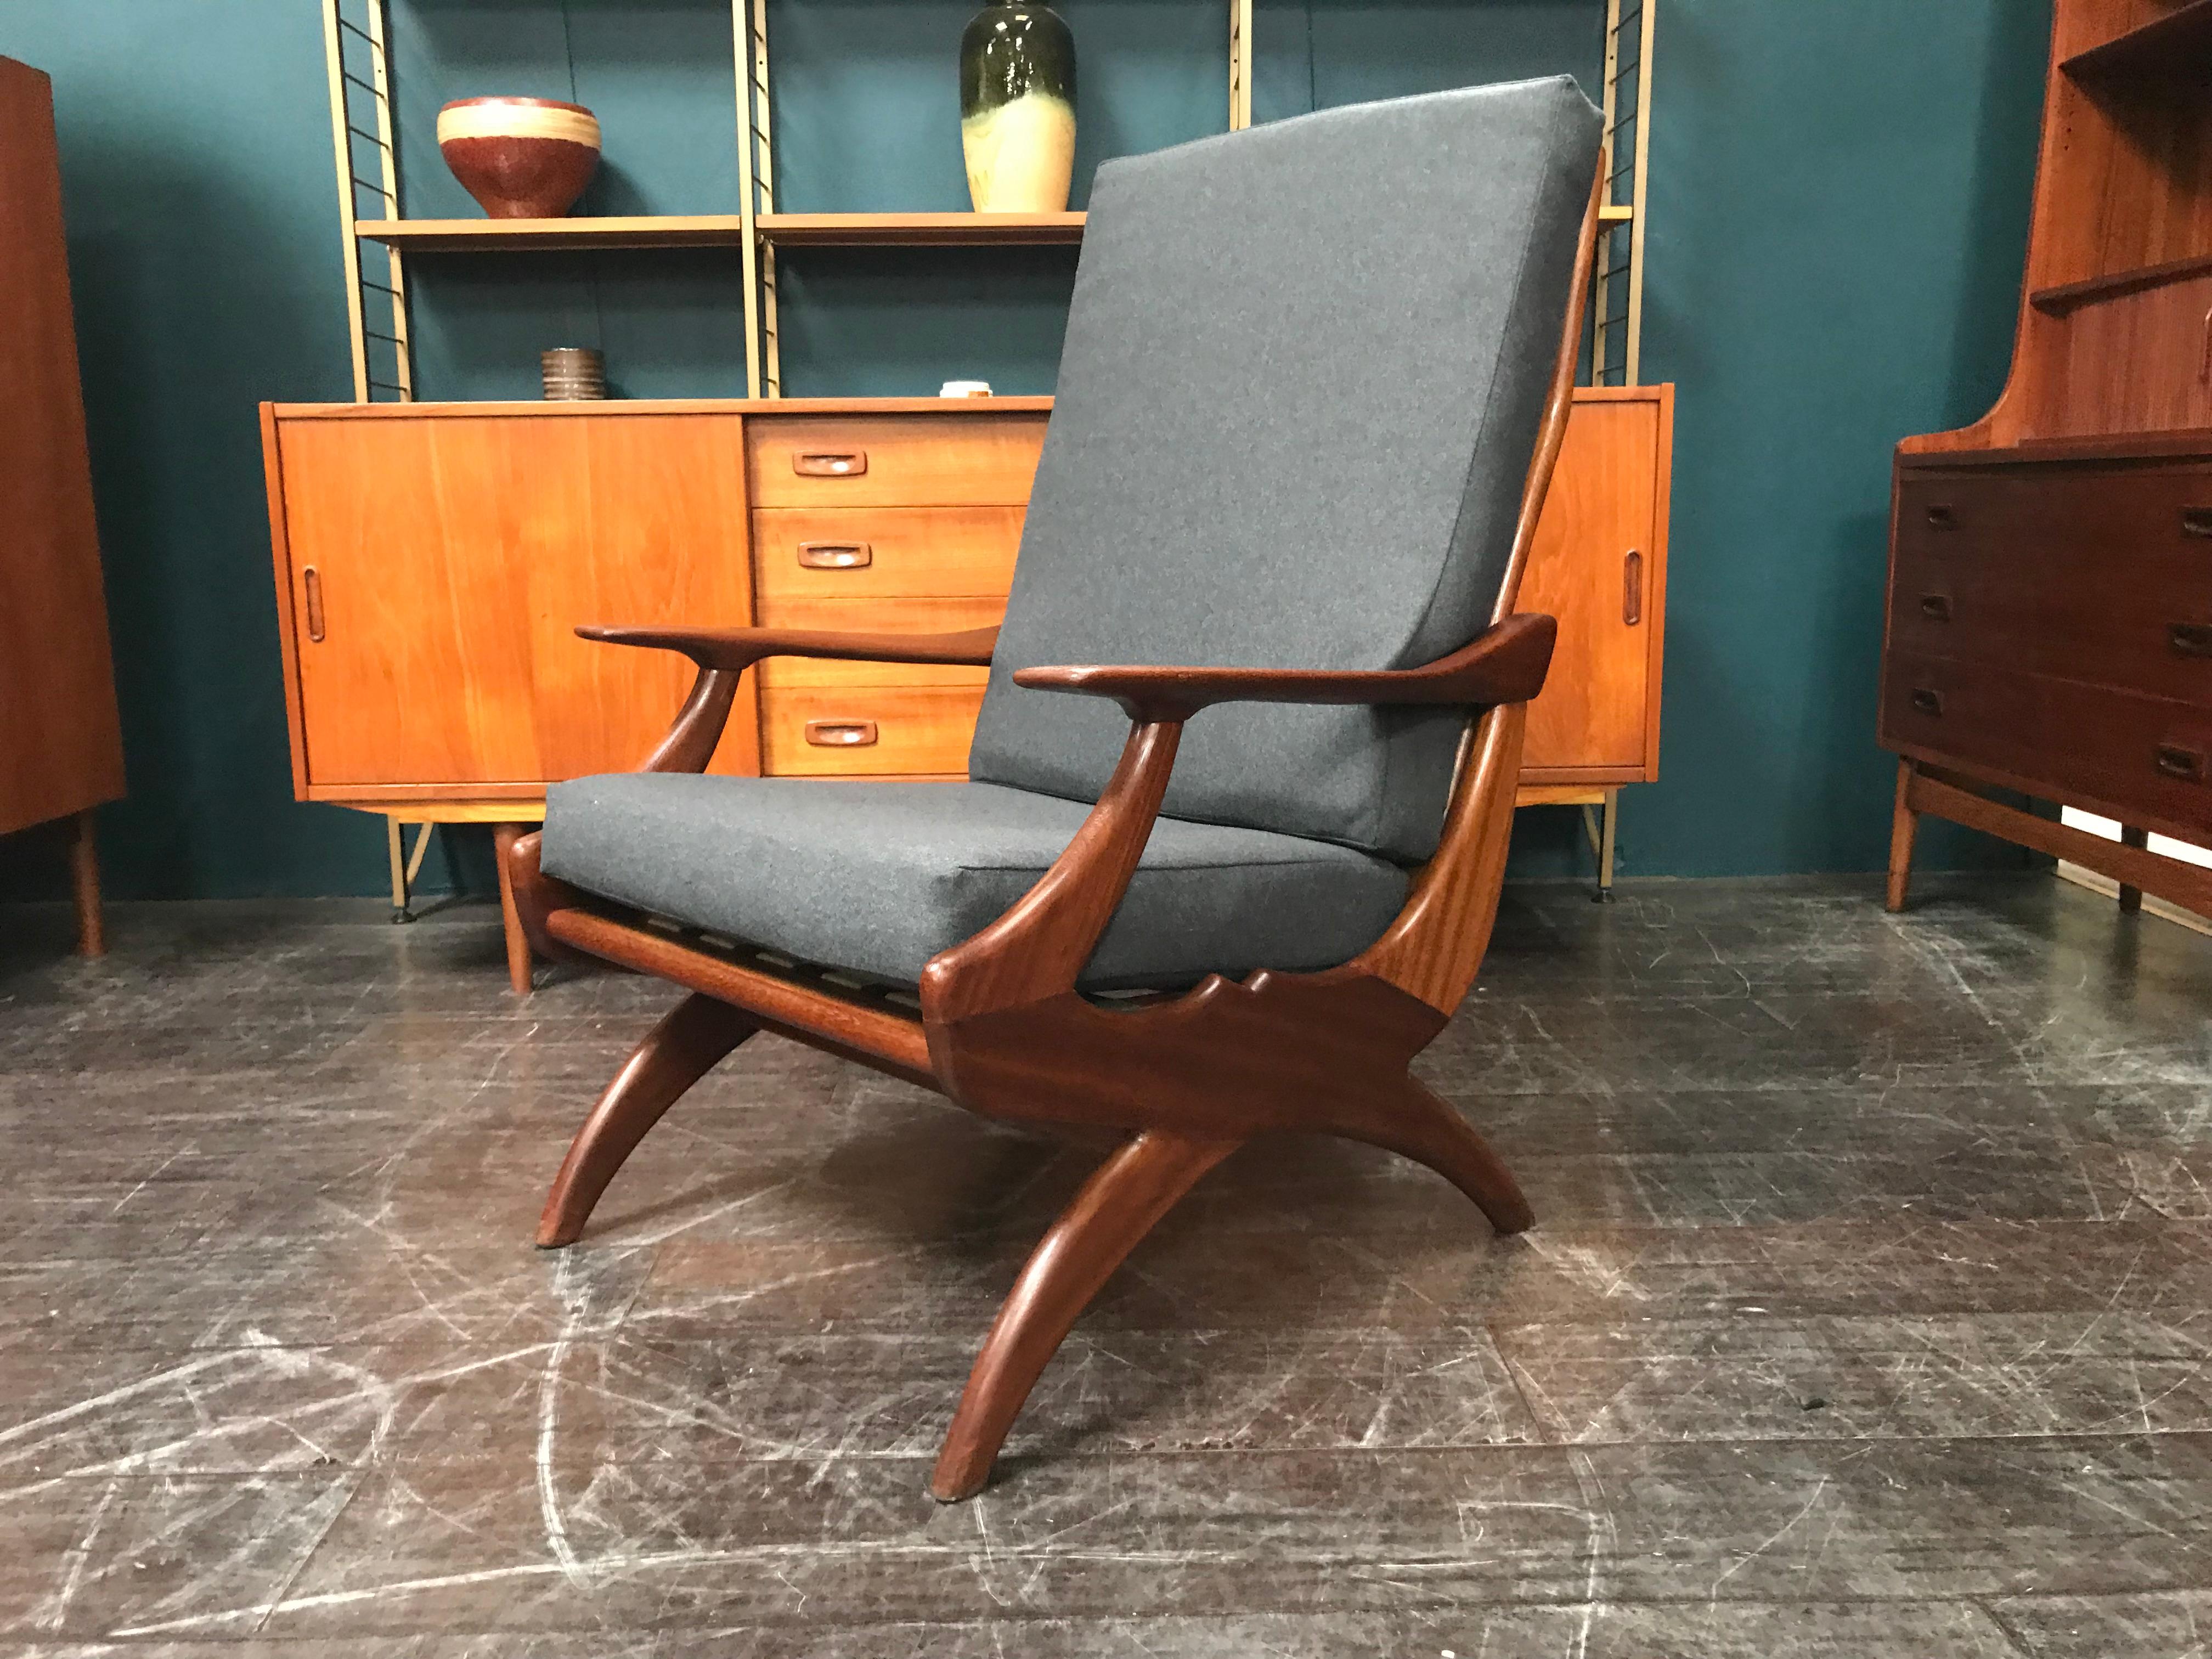 This gorgeous vintage midcentury chair was designed and made in The Netherlands in the 1960s and is one of the rarest chairs manufactured by De Ster (The Star).

The cushions and grey fabric are brand new as we’ve just had these renewed by a